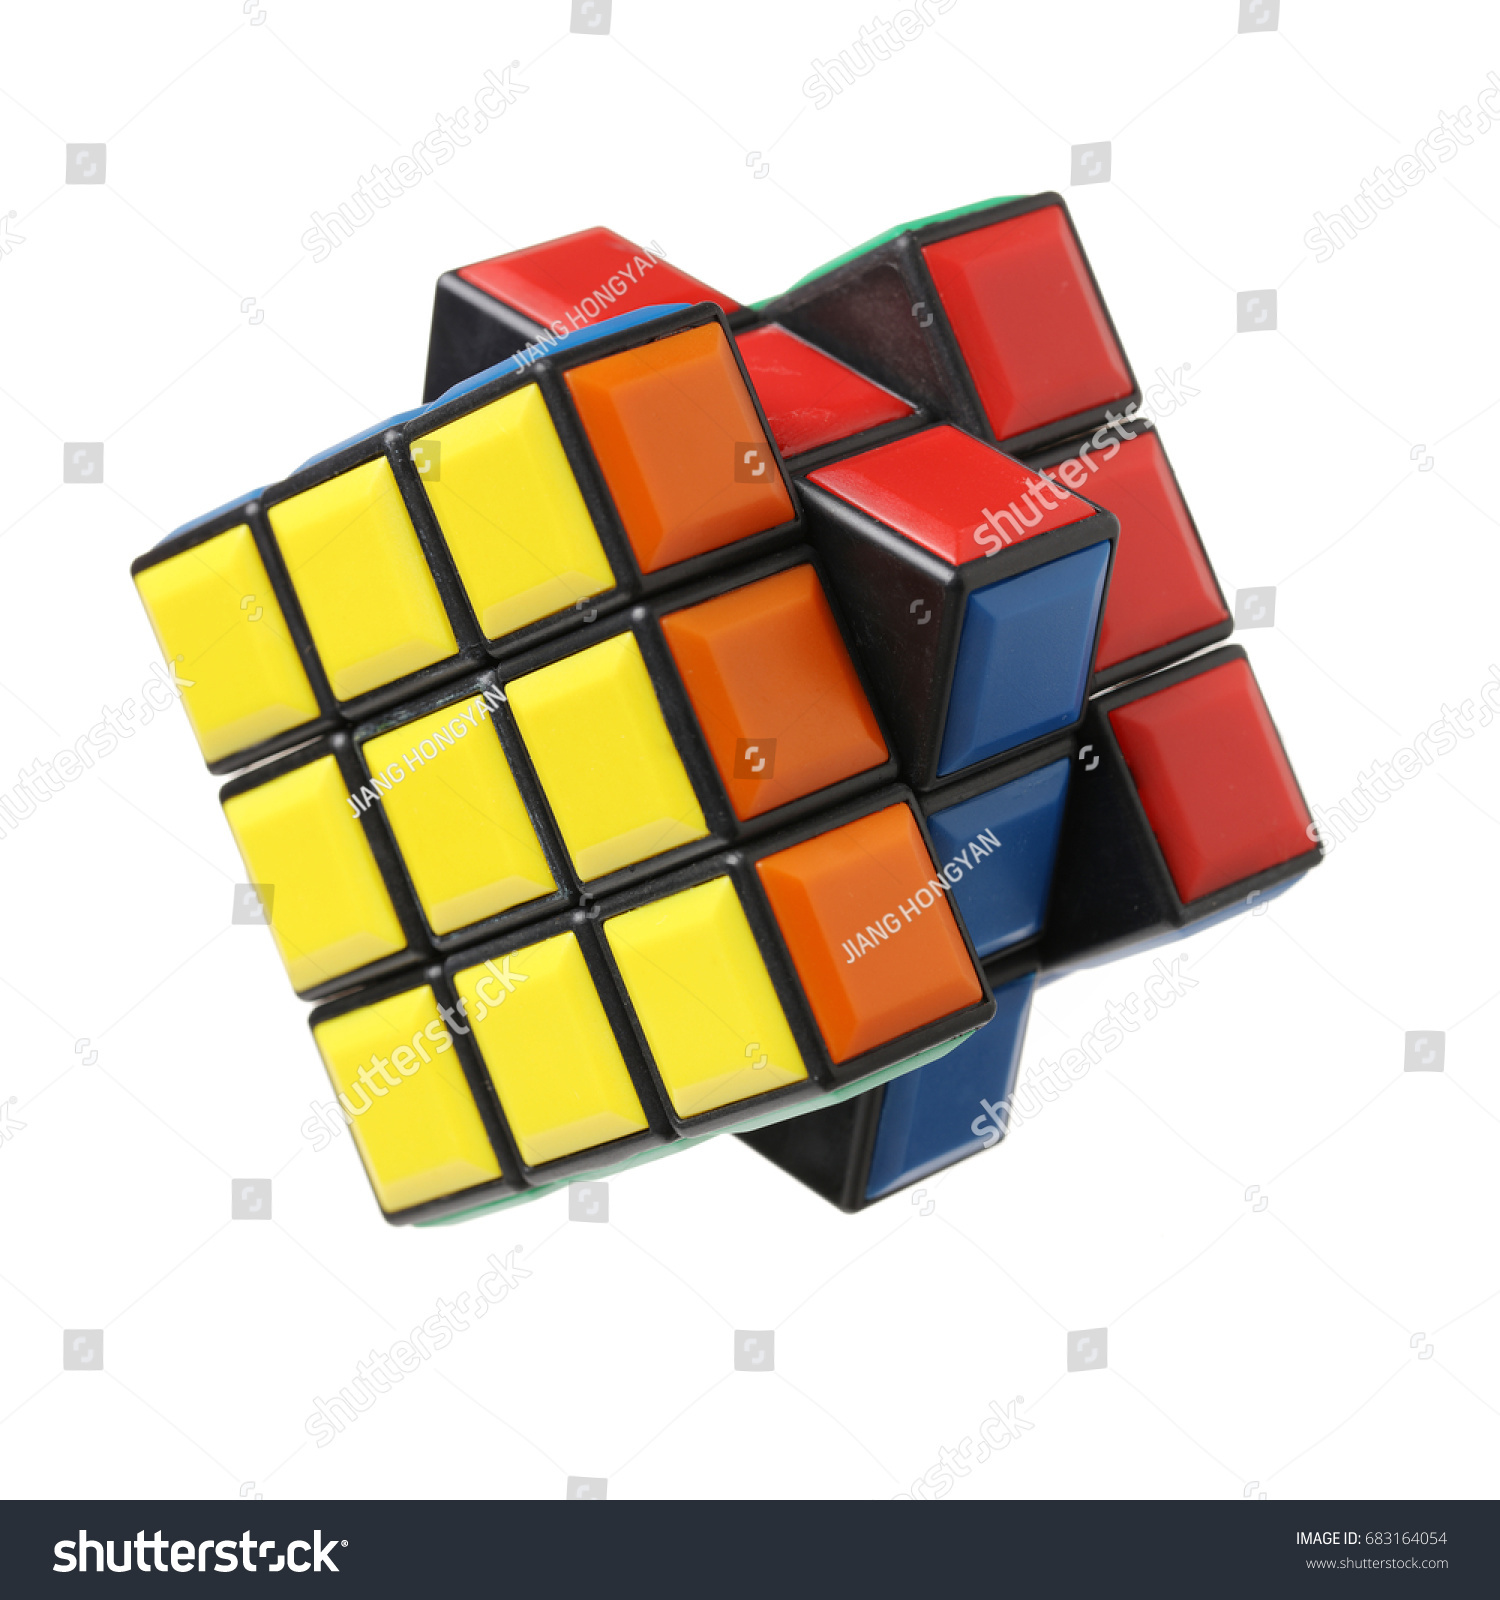 KRAGUJEVAC, SERBIA - DECEMBER 13, 2015: Rubik's 3x3x3 classic cube on a white background. Rubik's Cube invented by a Hungarian architect Erno Rubik in 1974. #683164054